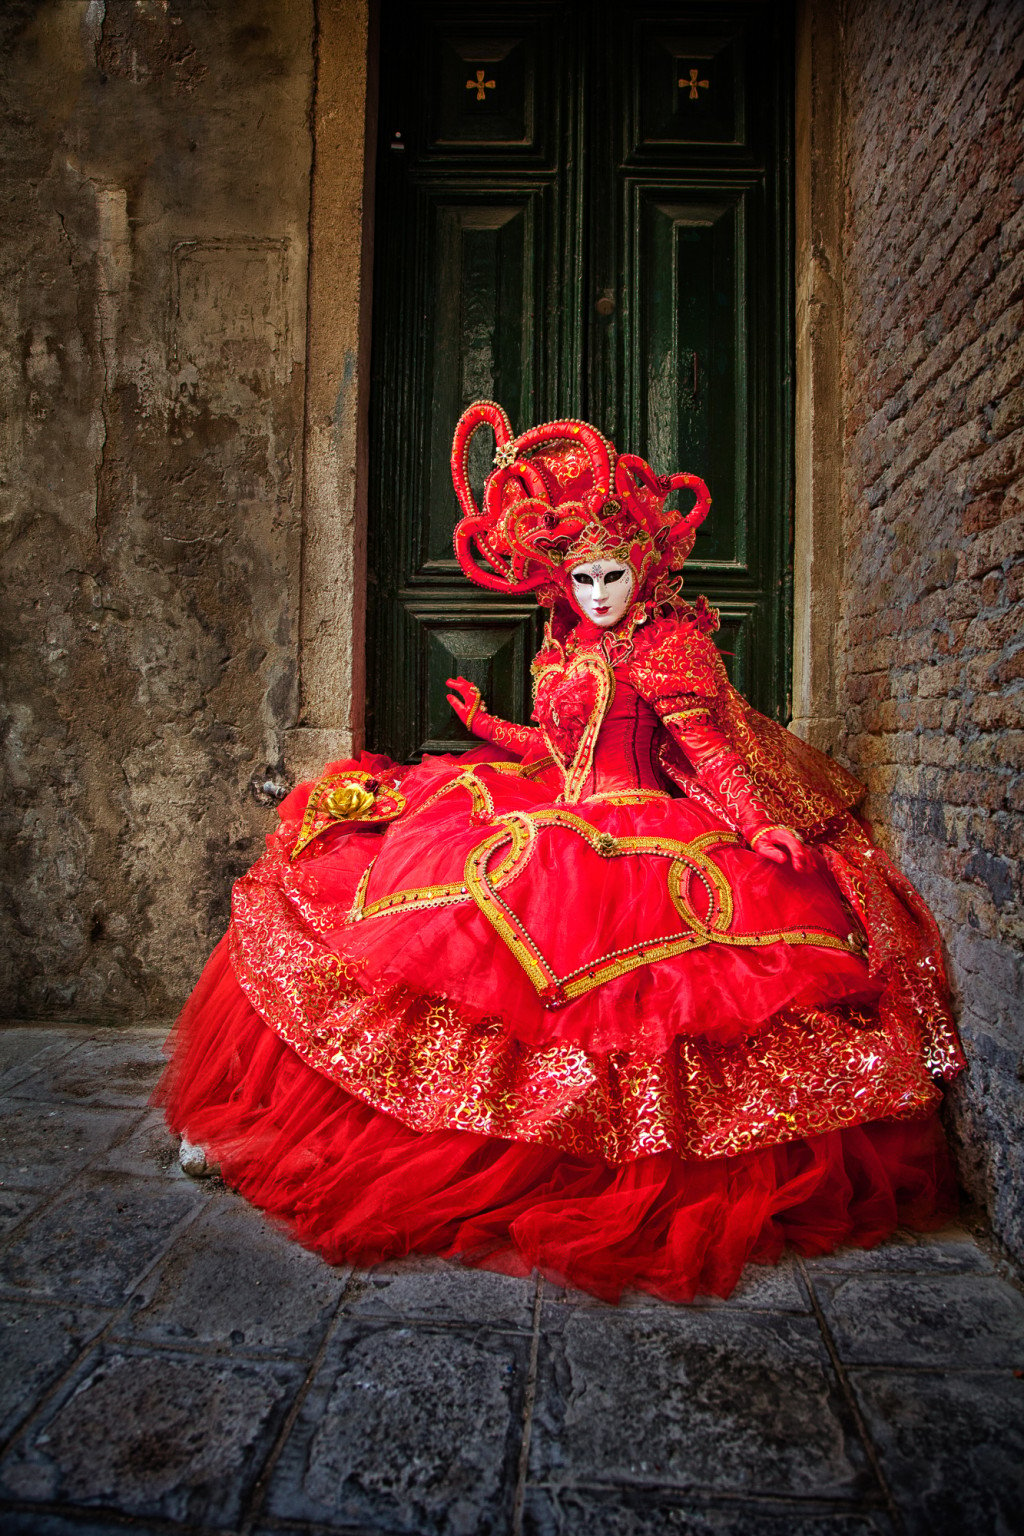 Red costumed model in a Venice doorway during the Carnival celebration